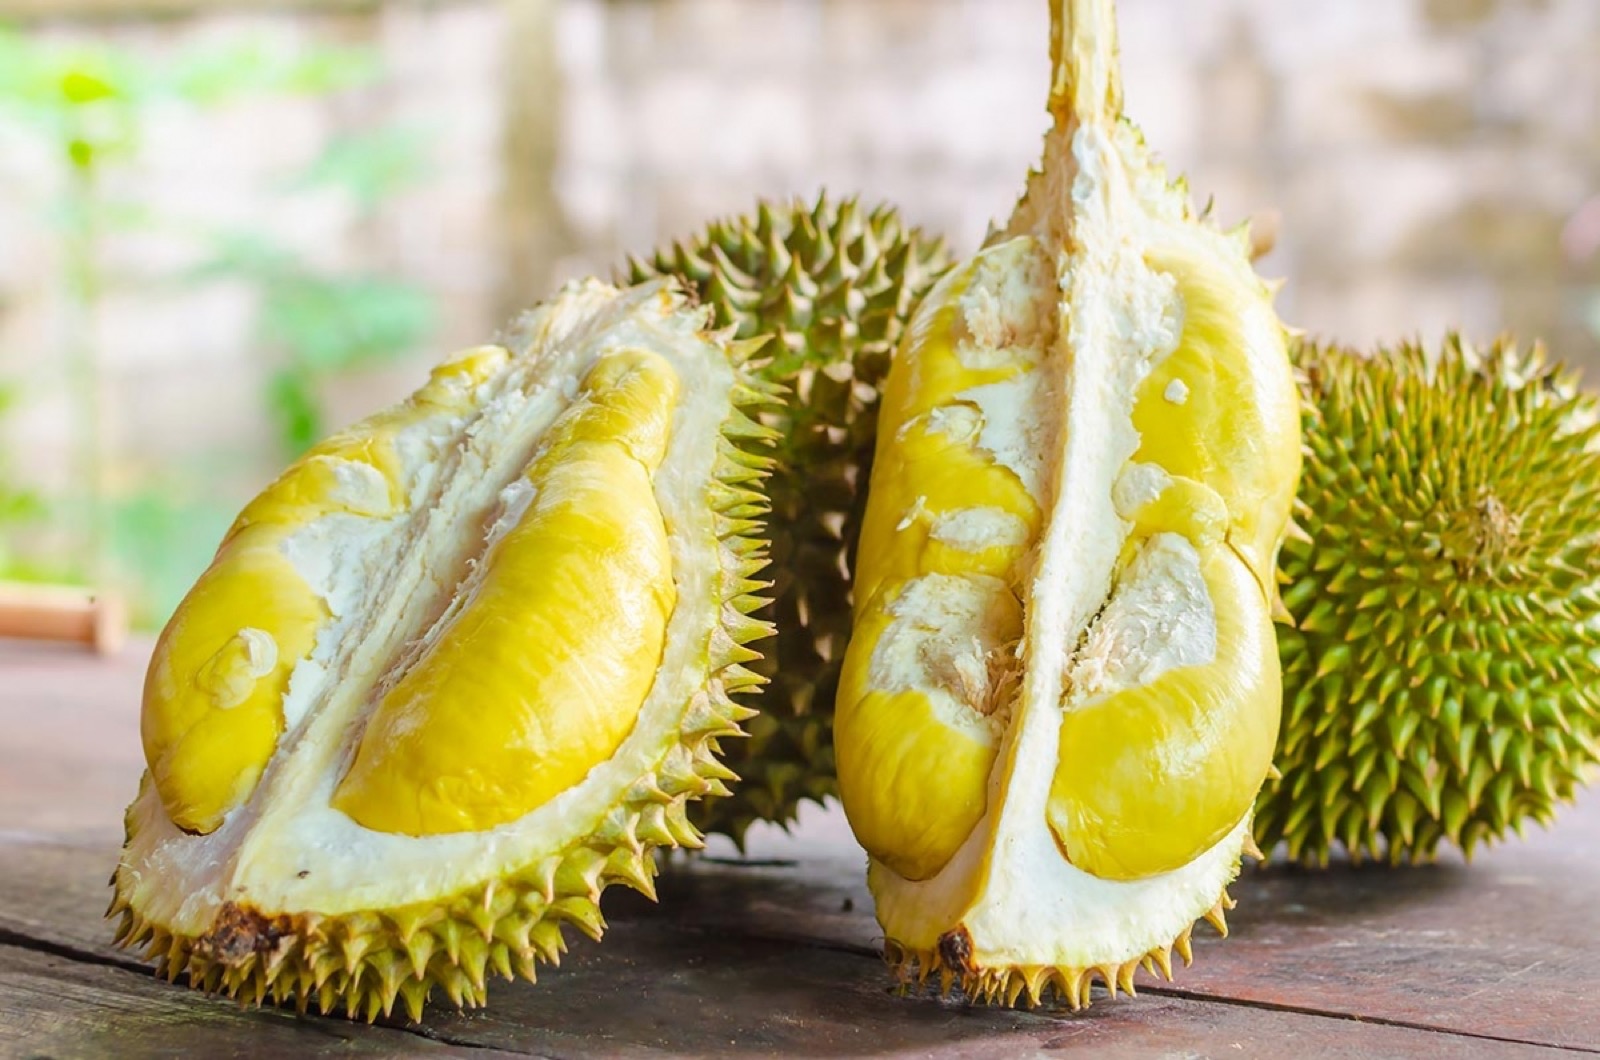 🍓 Sorry, But If You Can’t Pass This Plural Word Test, You Can Never Have Fruits Again Durian